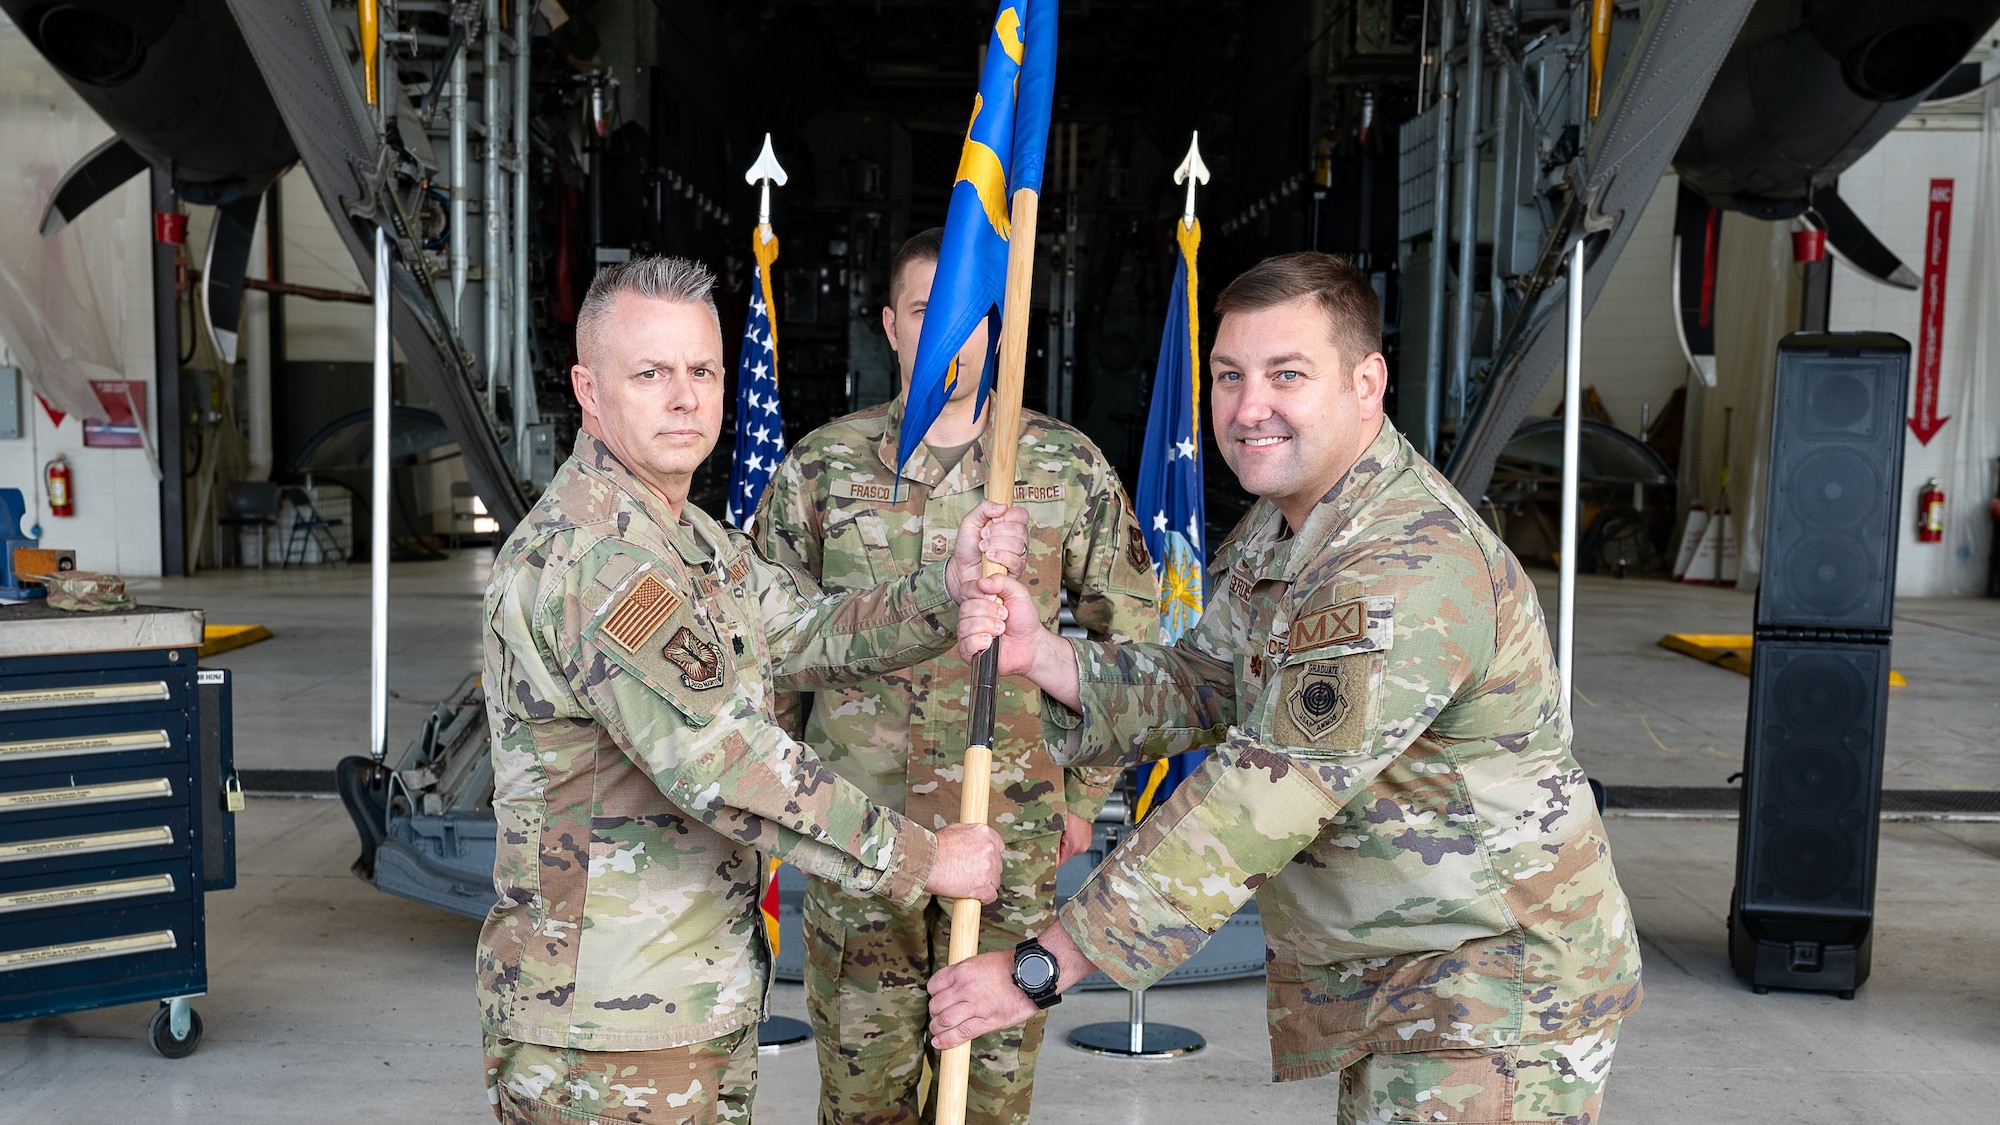 Two men in military uniform clasp a flagstaff affixed to a blue flag with a C-130 aircraft in the background.